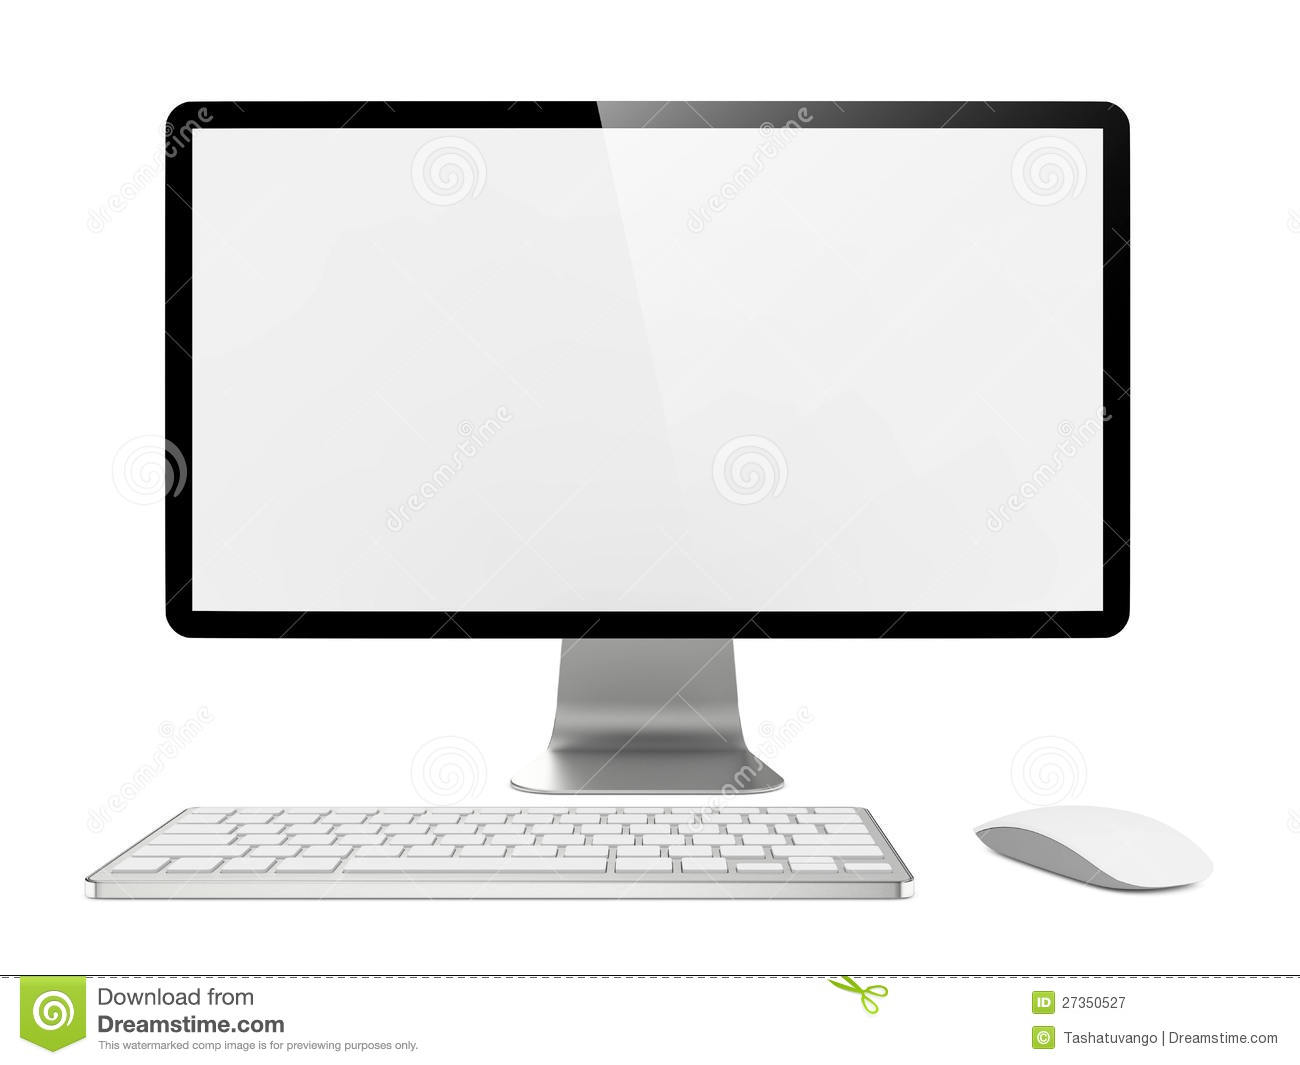 Monitor And Keyboard Clipart   Clipart Panda   Free Clipart Images